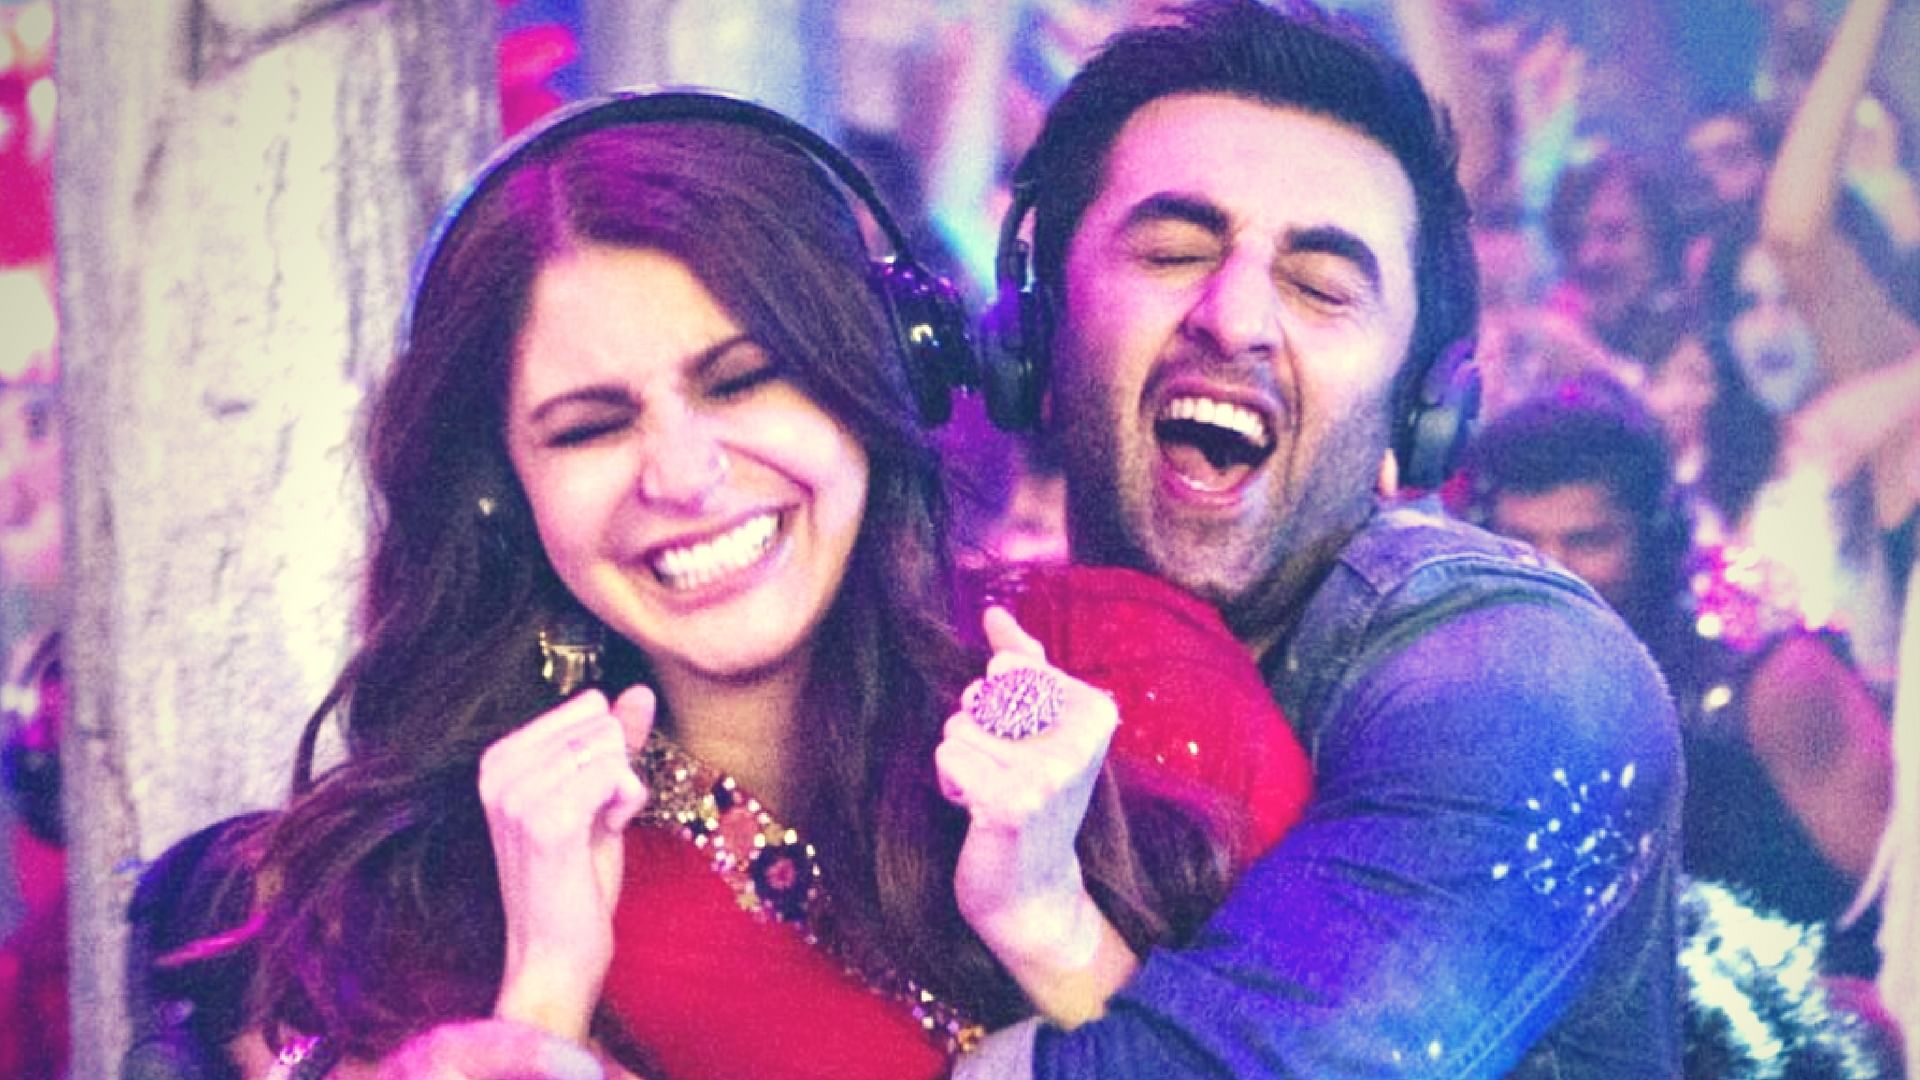 Ranbir and Anushka couldn’t be happier about being single. (Photo courtesy: YouTube/<a href="https://www.youtube.com/watch?v=CvPdtf8Ijj4">Sony Music India</a>)